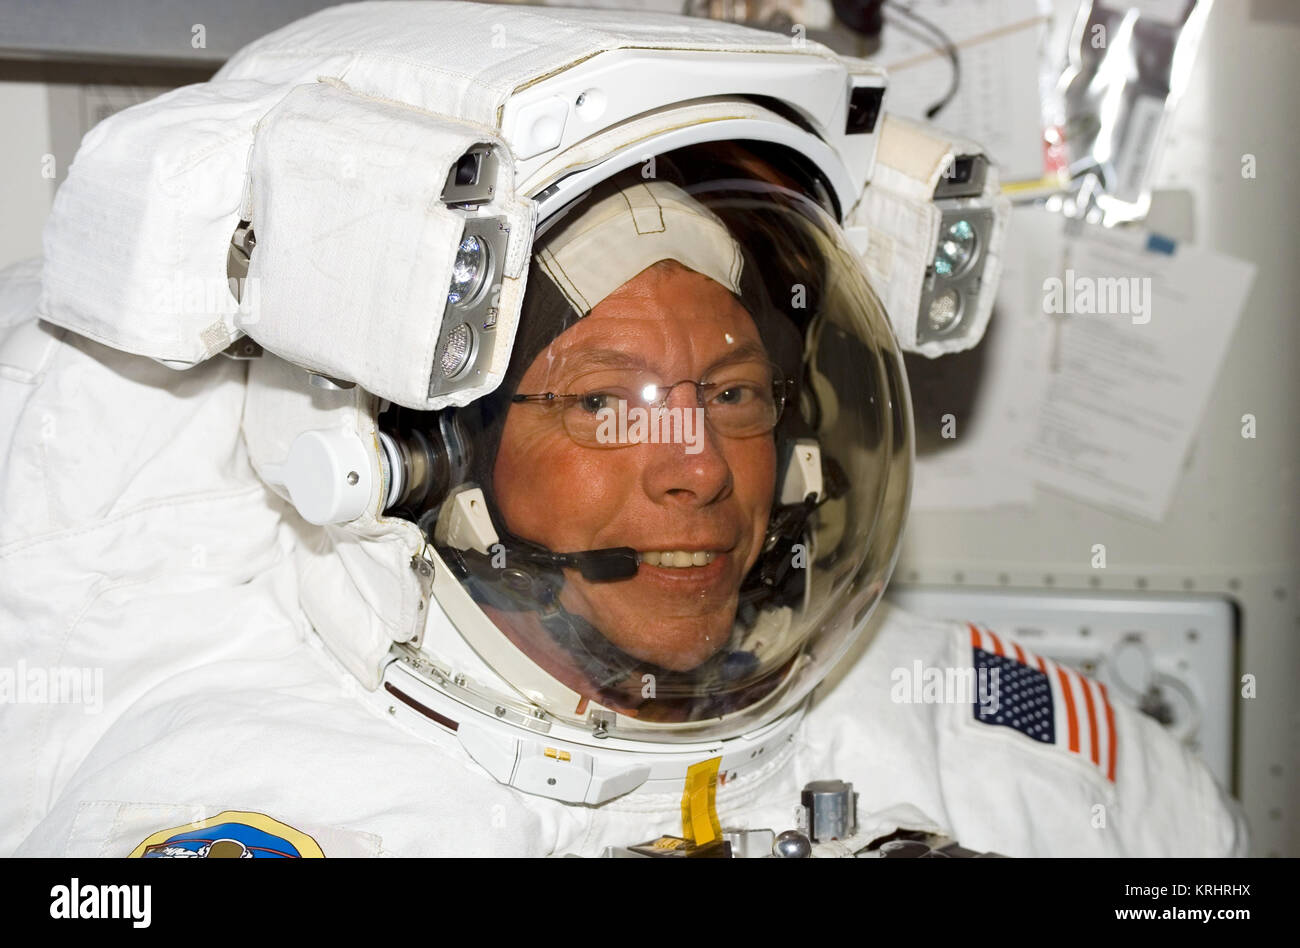 NASA Space Shuttle Discovery International Space Station STS-121 mission prime crew member American astronaut Michael Fossum prepares for his extravehicular activity spacewalk in the ISS Quest Airlock July 8, 2006 in Earth orbit. Stock Photo